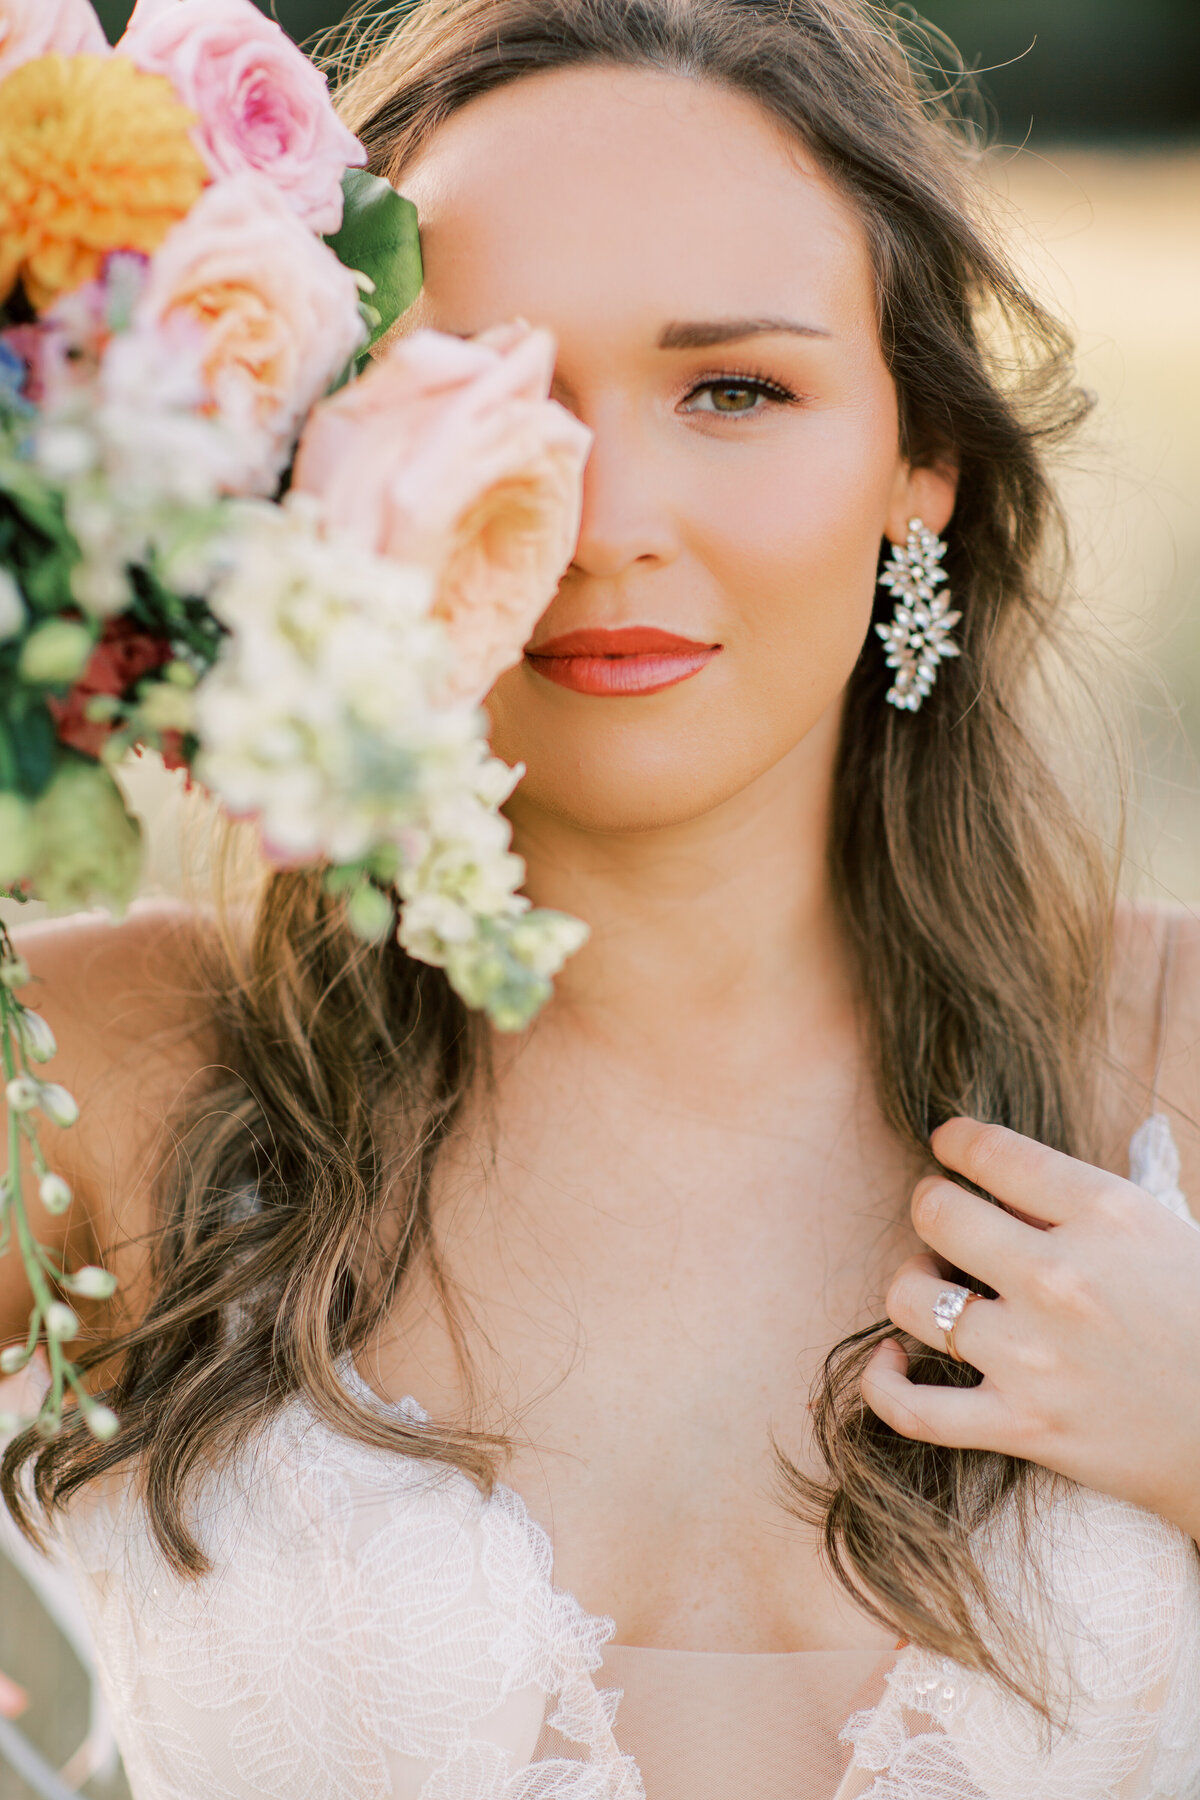 Best Wedding Photographer in Victoria, Texas: Jenny King | Fine art and luxury destination wedding photographer located in south Texas.